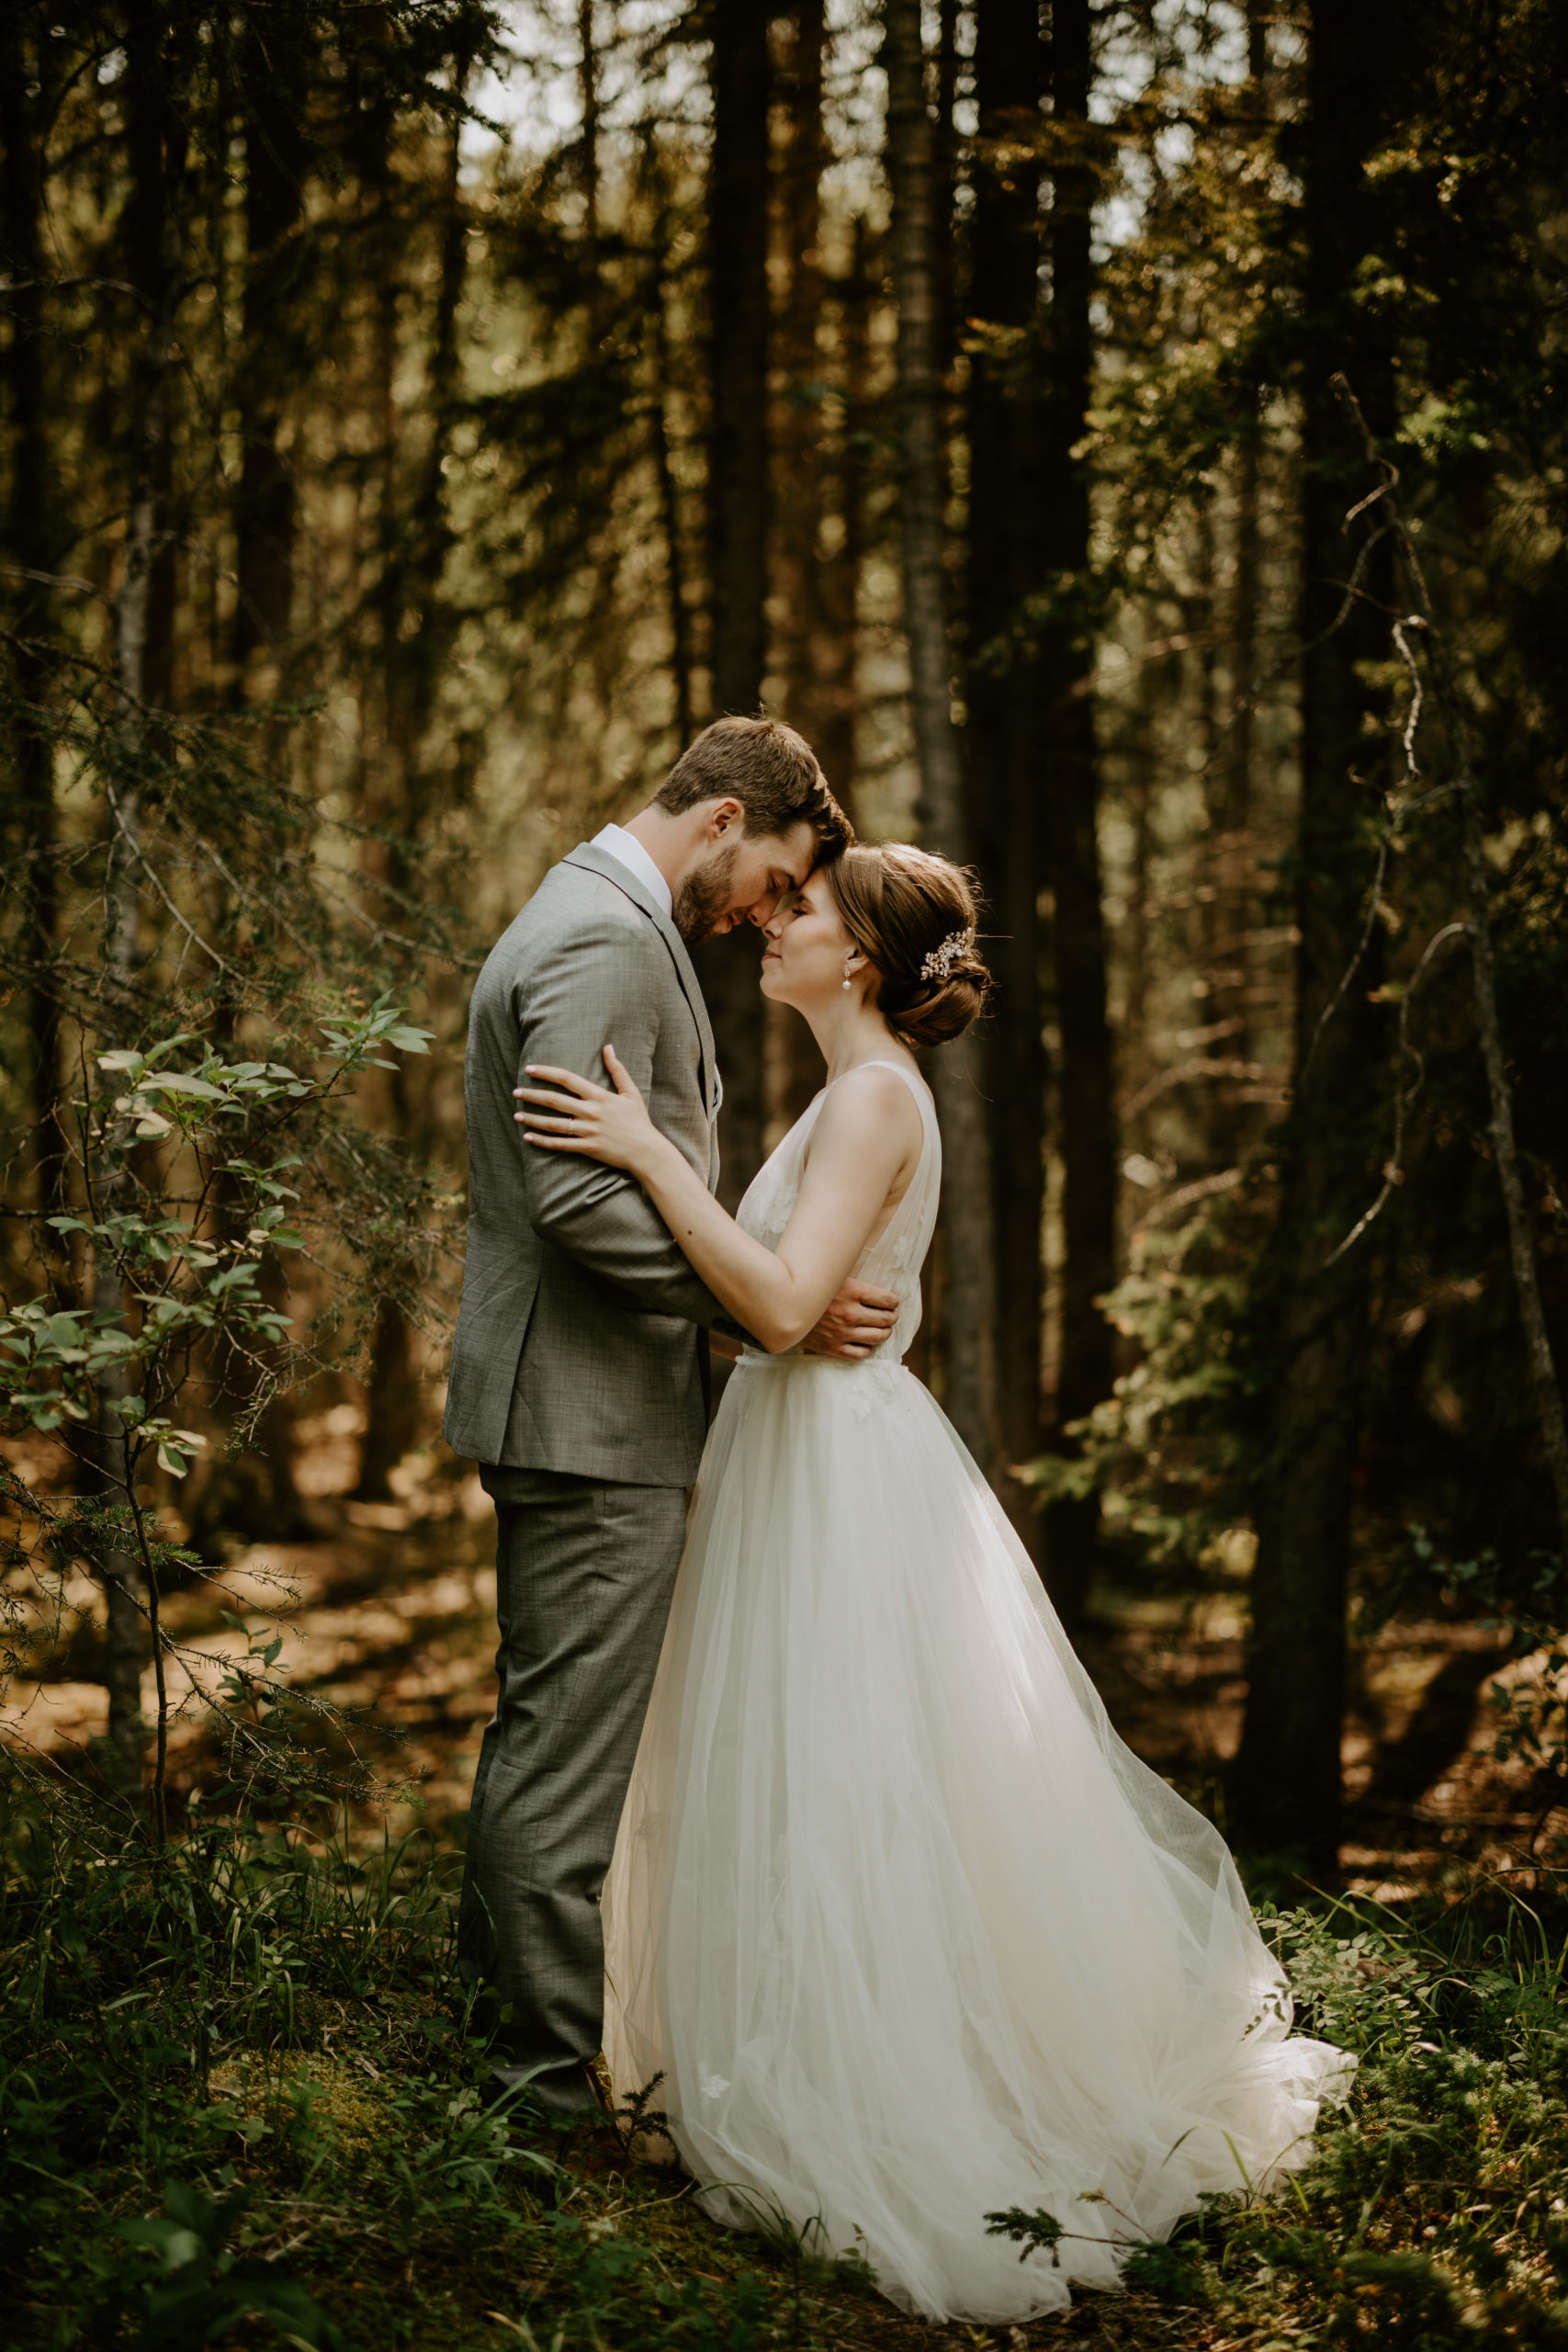 The Real Bride Couple, Laura and Braedon are embracing each other in a beautiful setting and Laura is wearing the Lainie gown by Willowby Bridal.